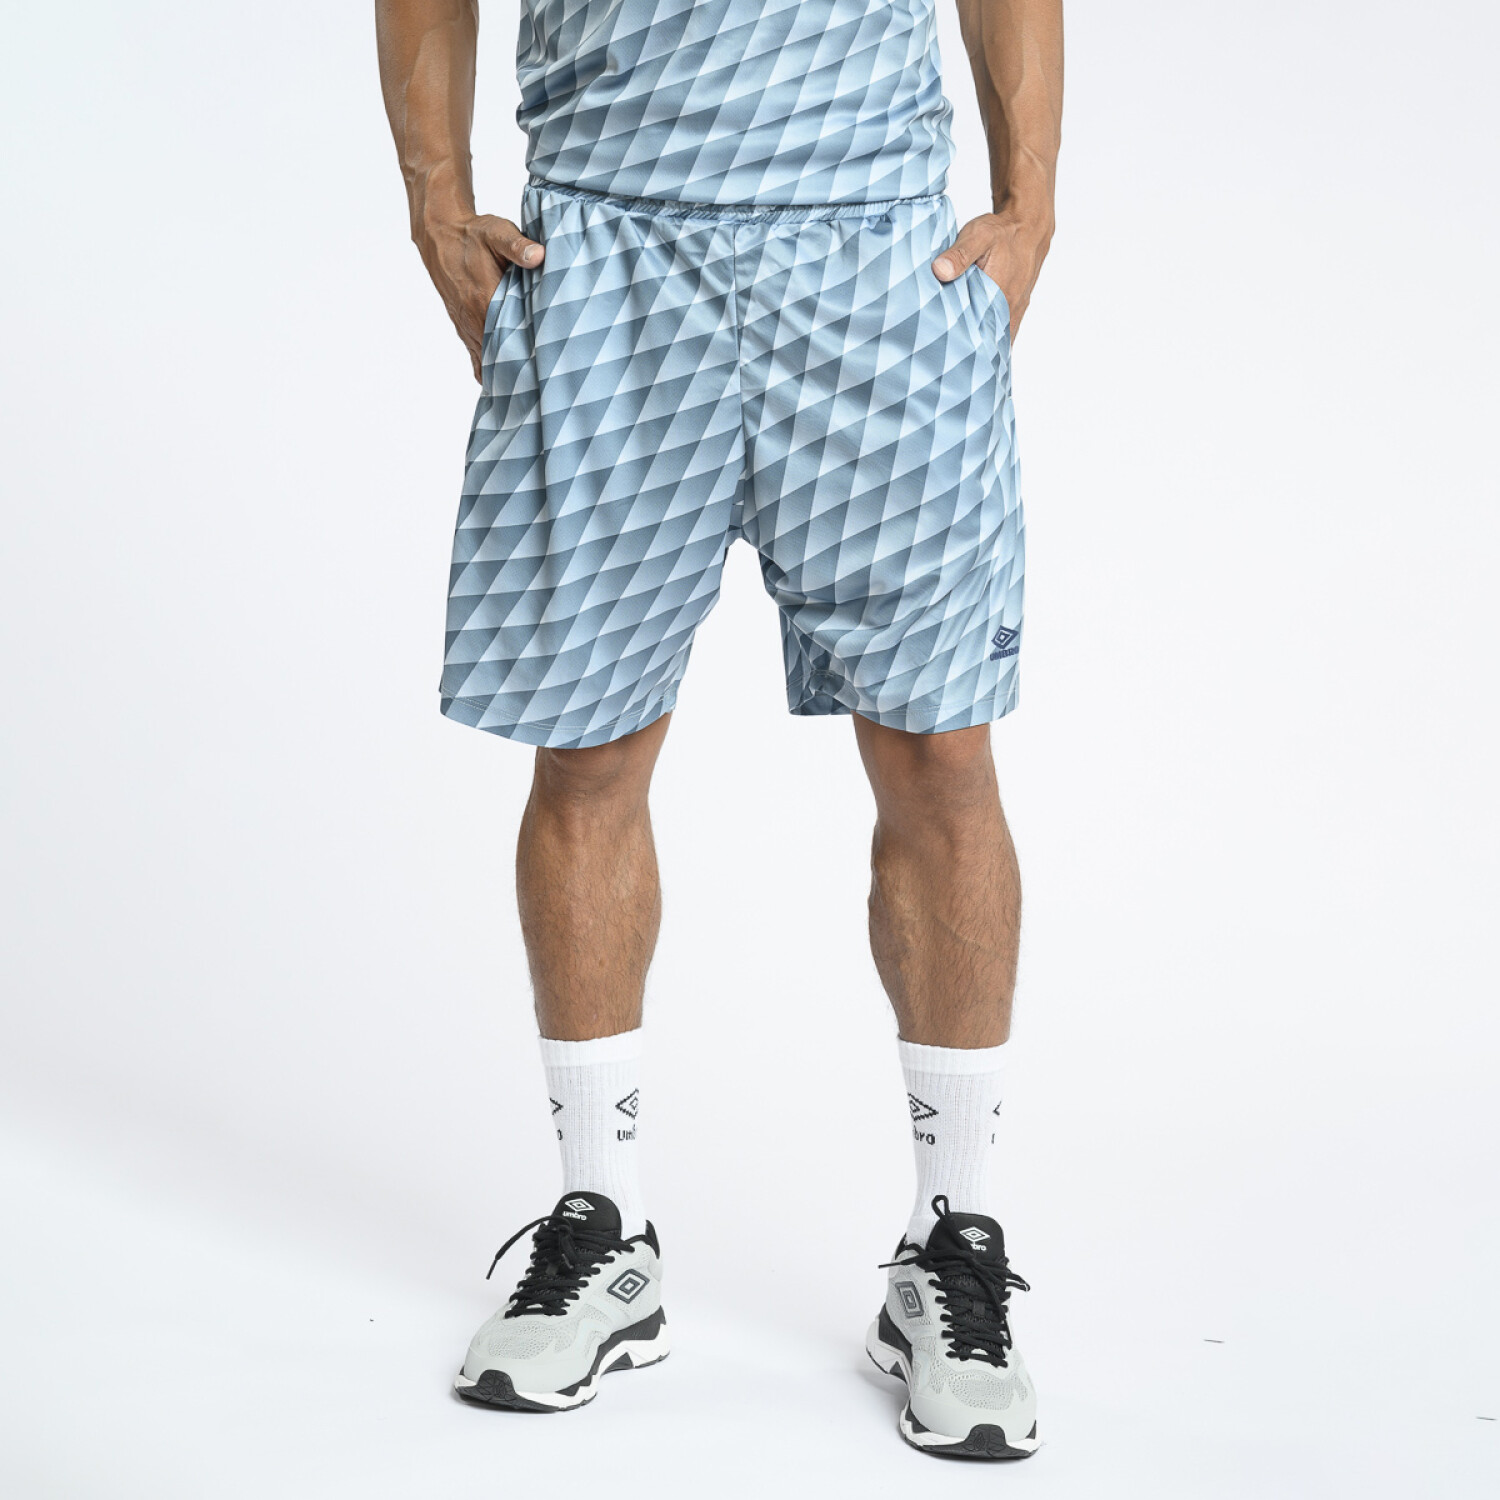 SHORT PRINTED SPORTS Umbro Hombre - Kxy — Timeout